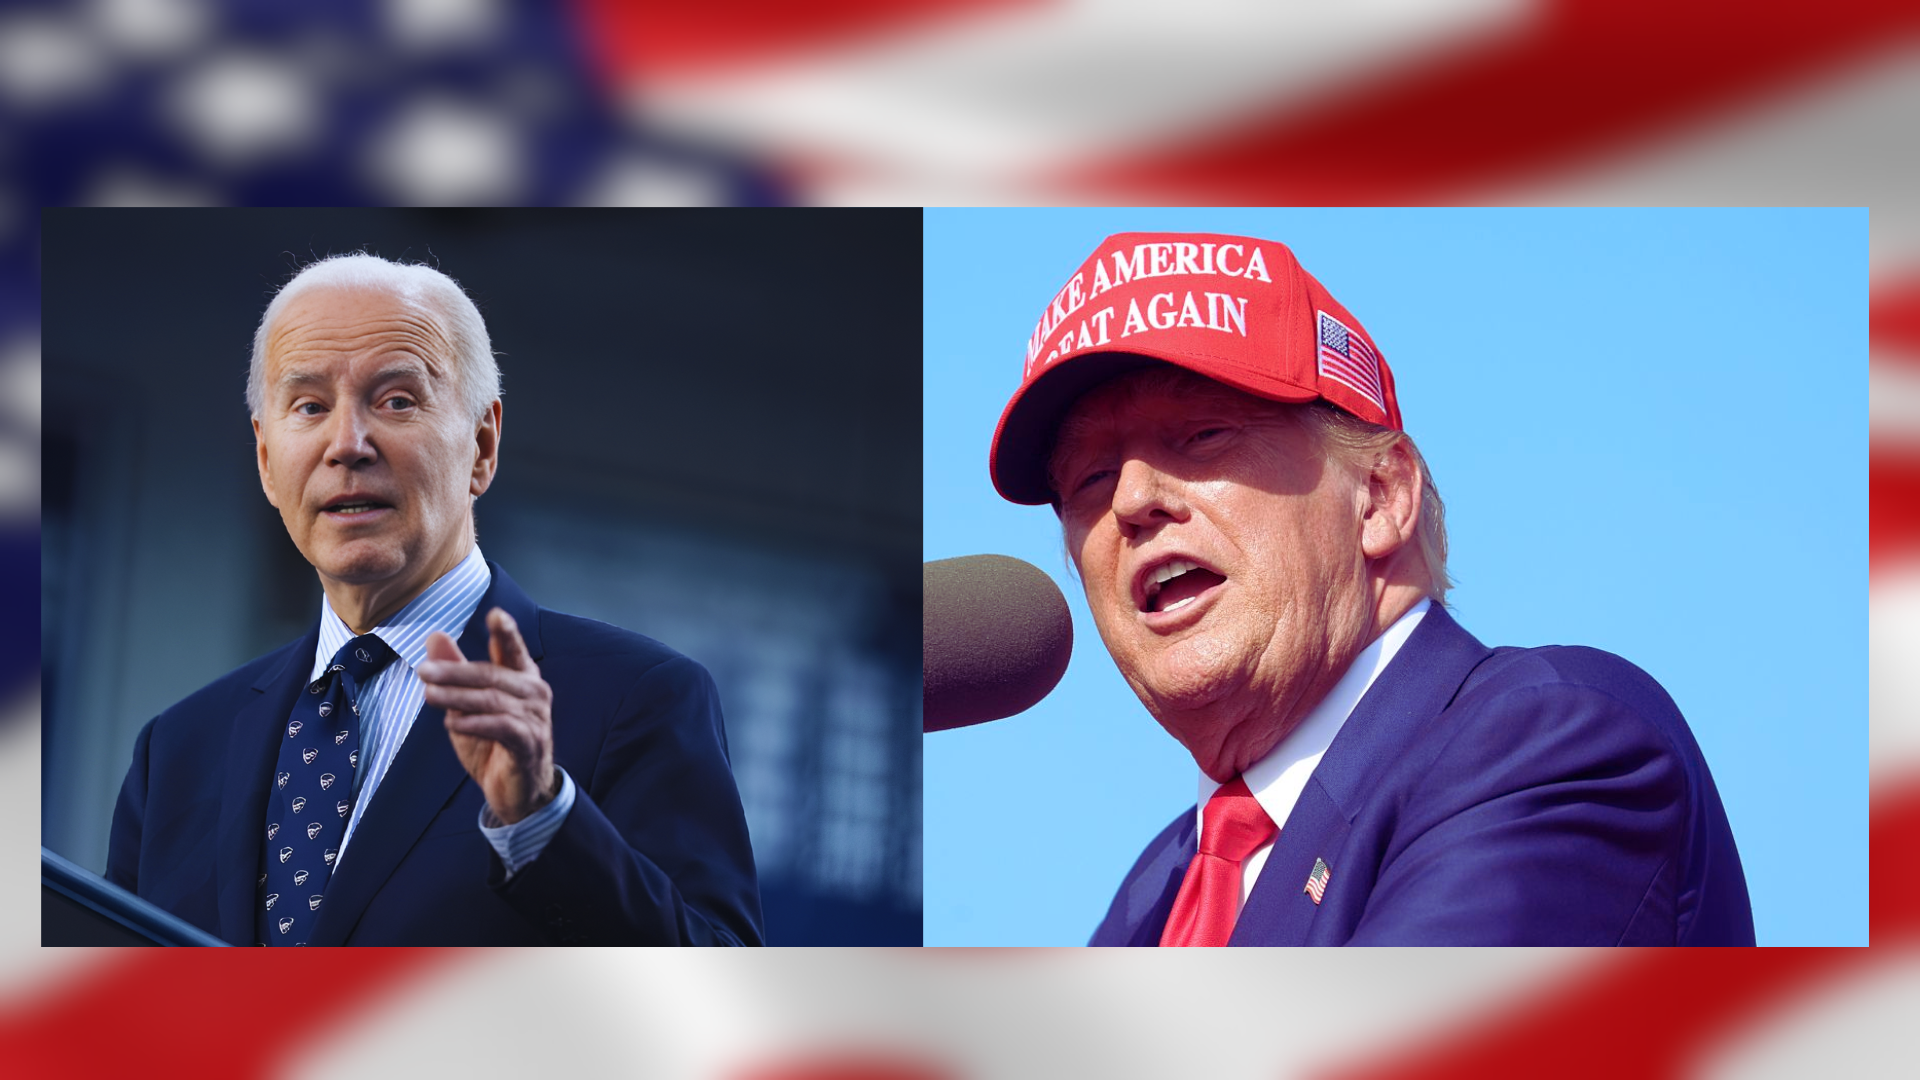 Biden And Trump Set For First Presidential Debate Ahead Of US Elections